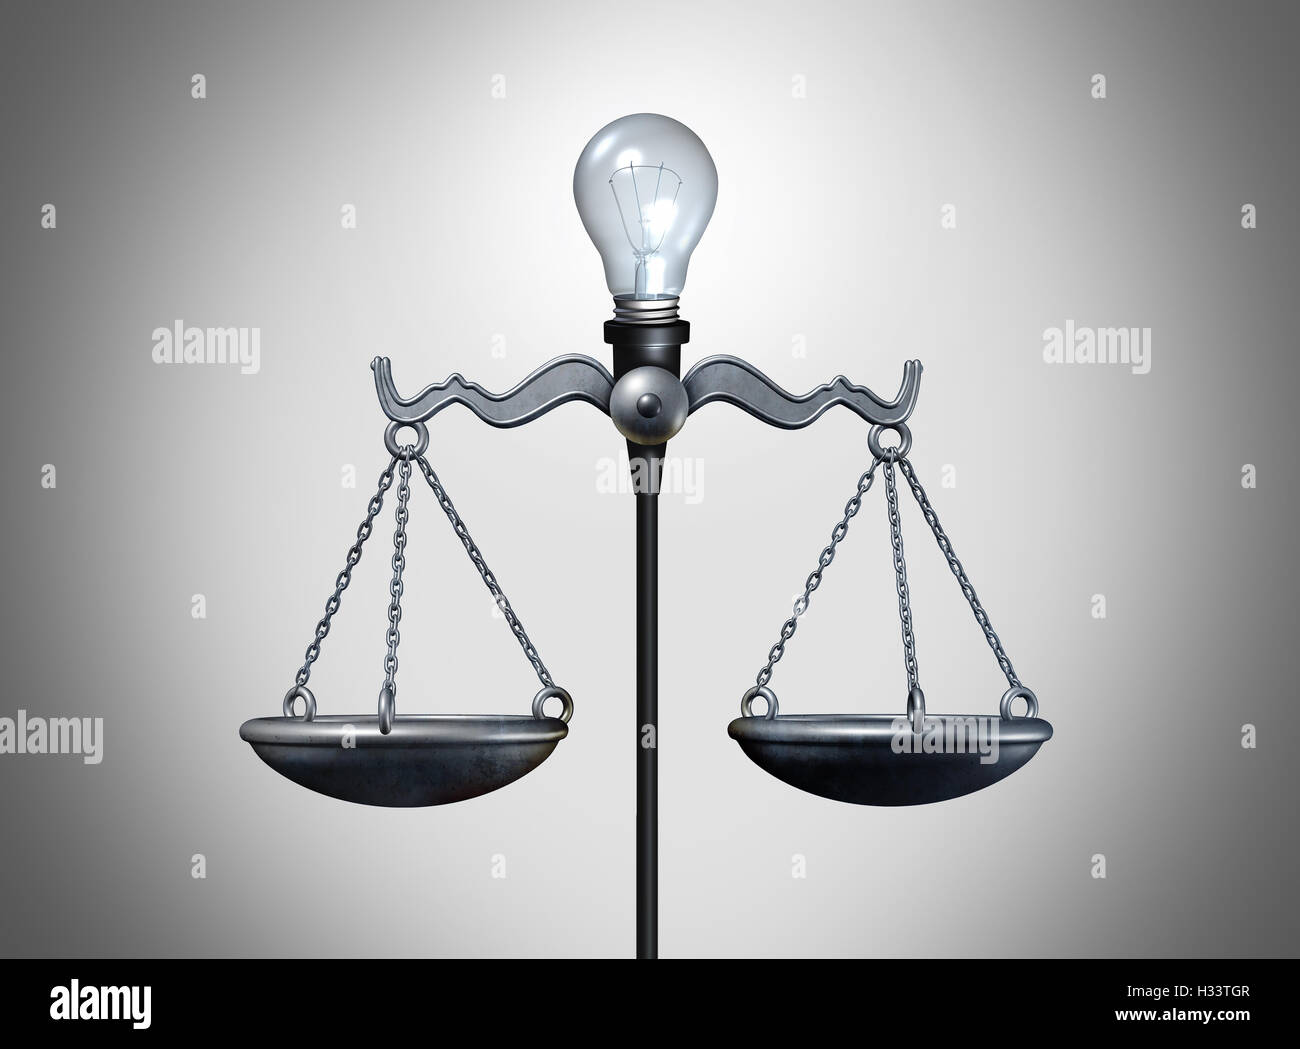 Legal idea and smart intelligent law strategy concept as an illuminated lightbulb balancing a justice scale as a bright lawyer or attorney icon for legislation or verdict success as a 3D illustration. Stock Photo